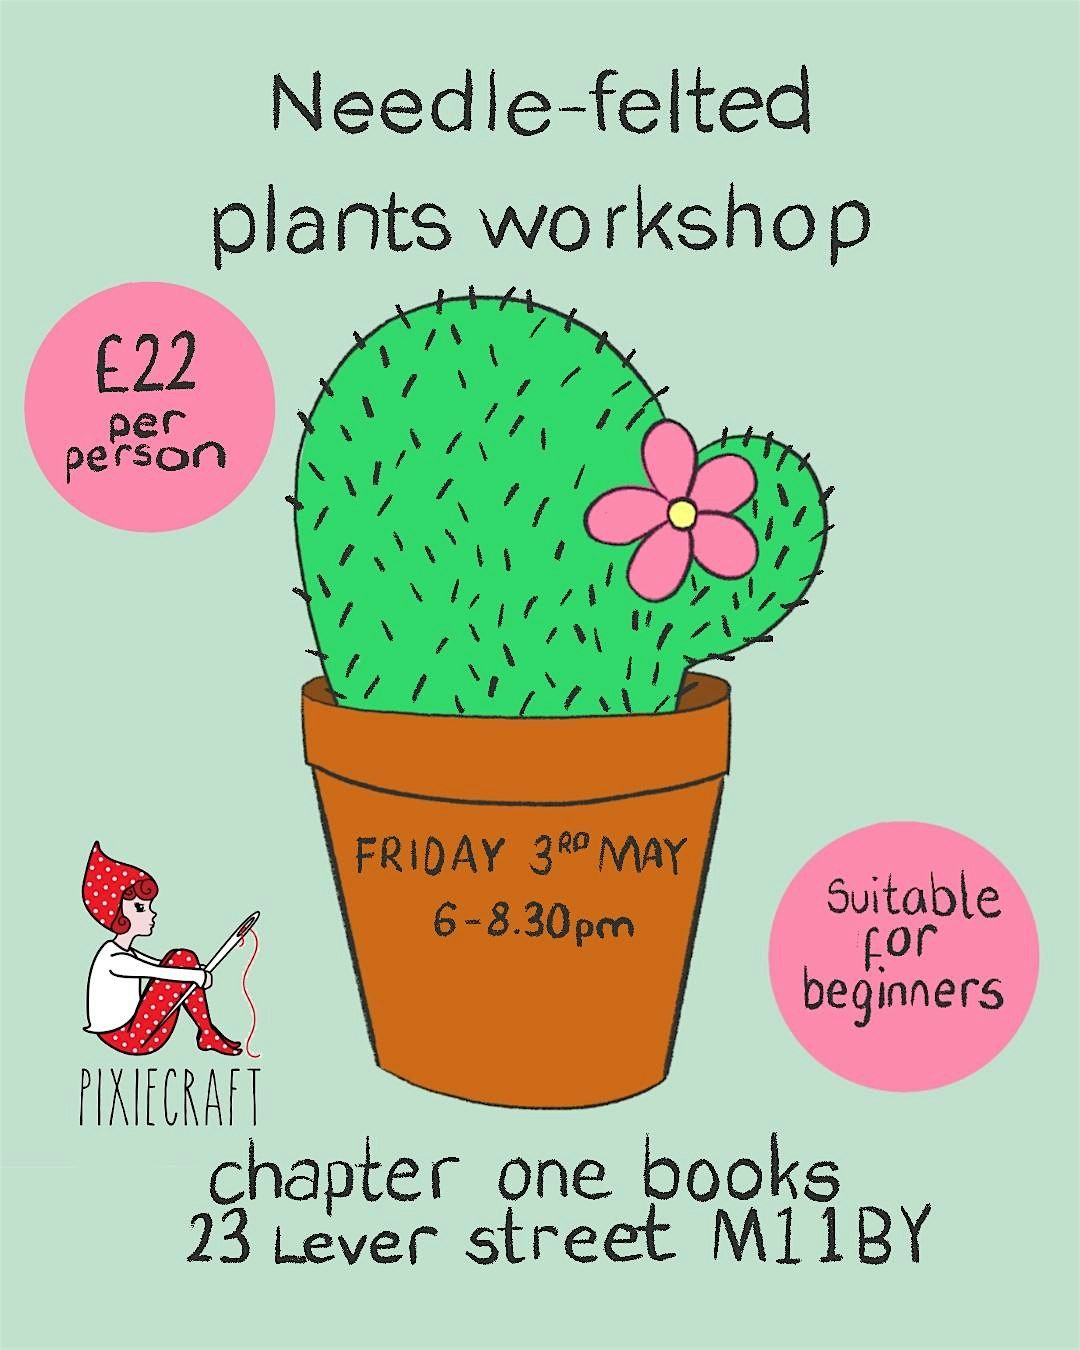 Needle felted plants workshop with Pixiecraft